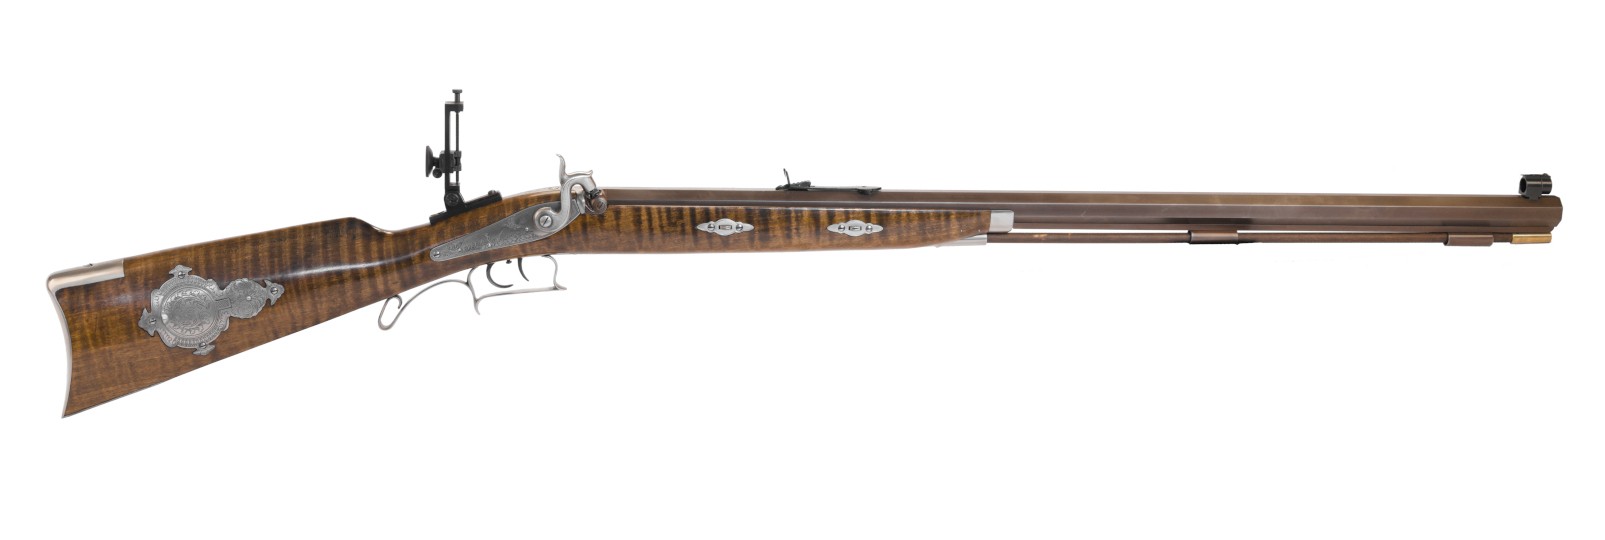 Tryon "Target" "Maple" DELUXE Rifle